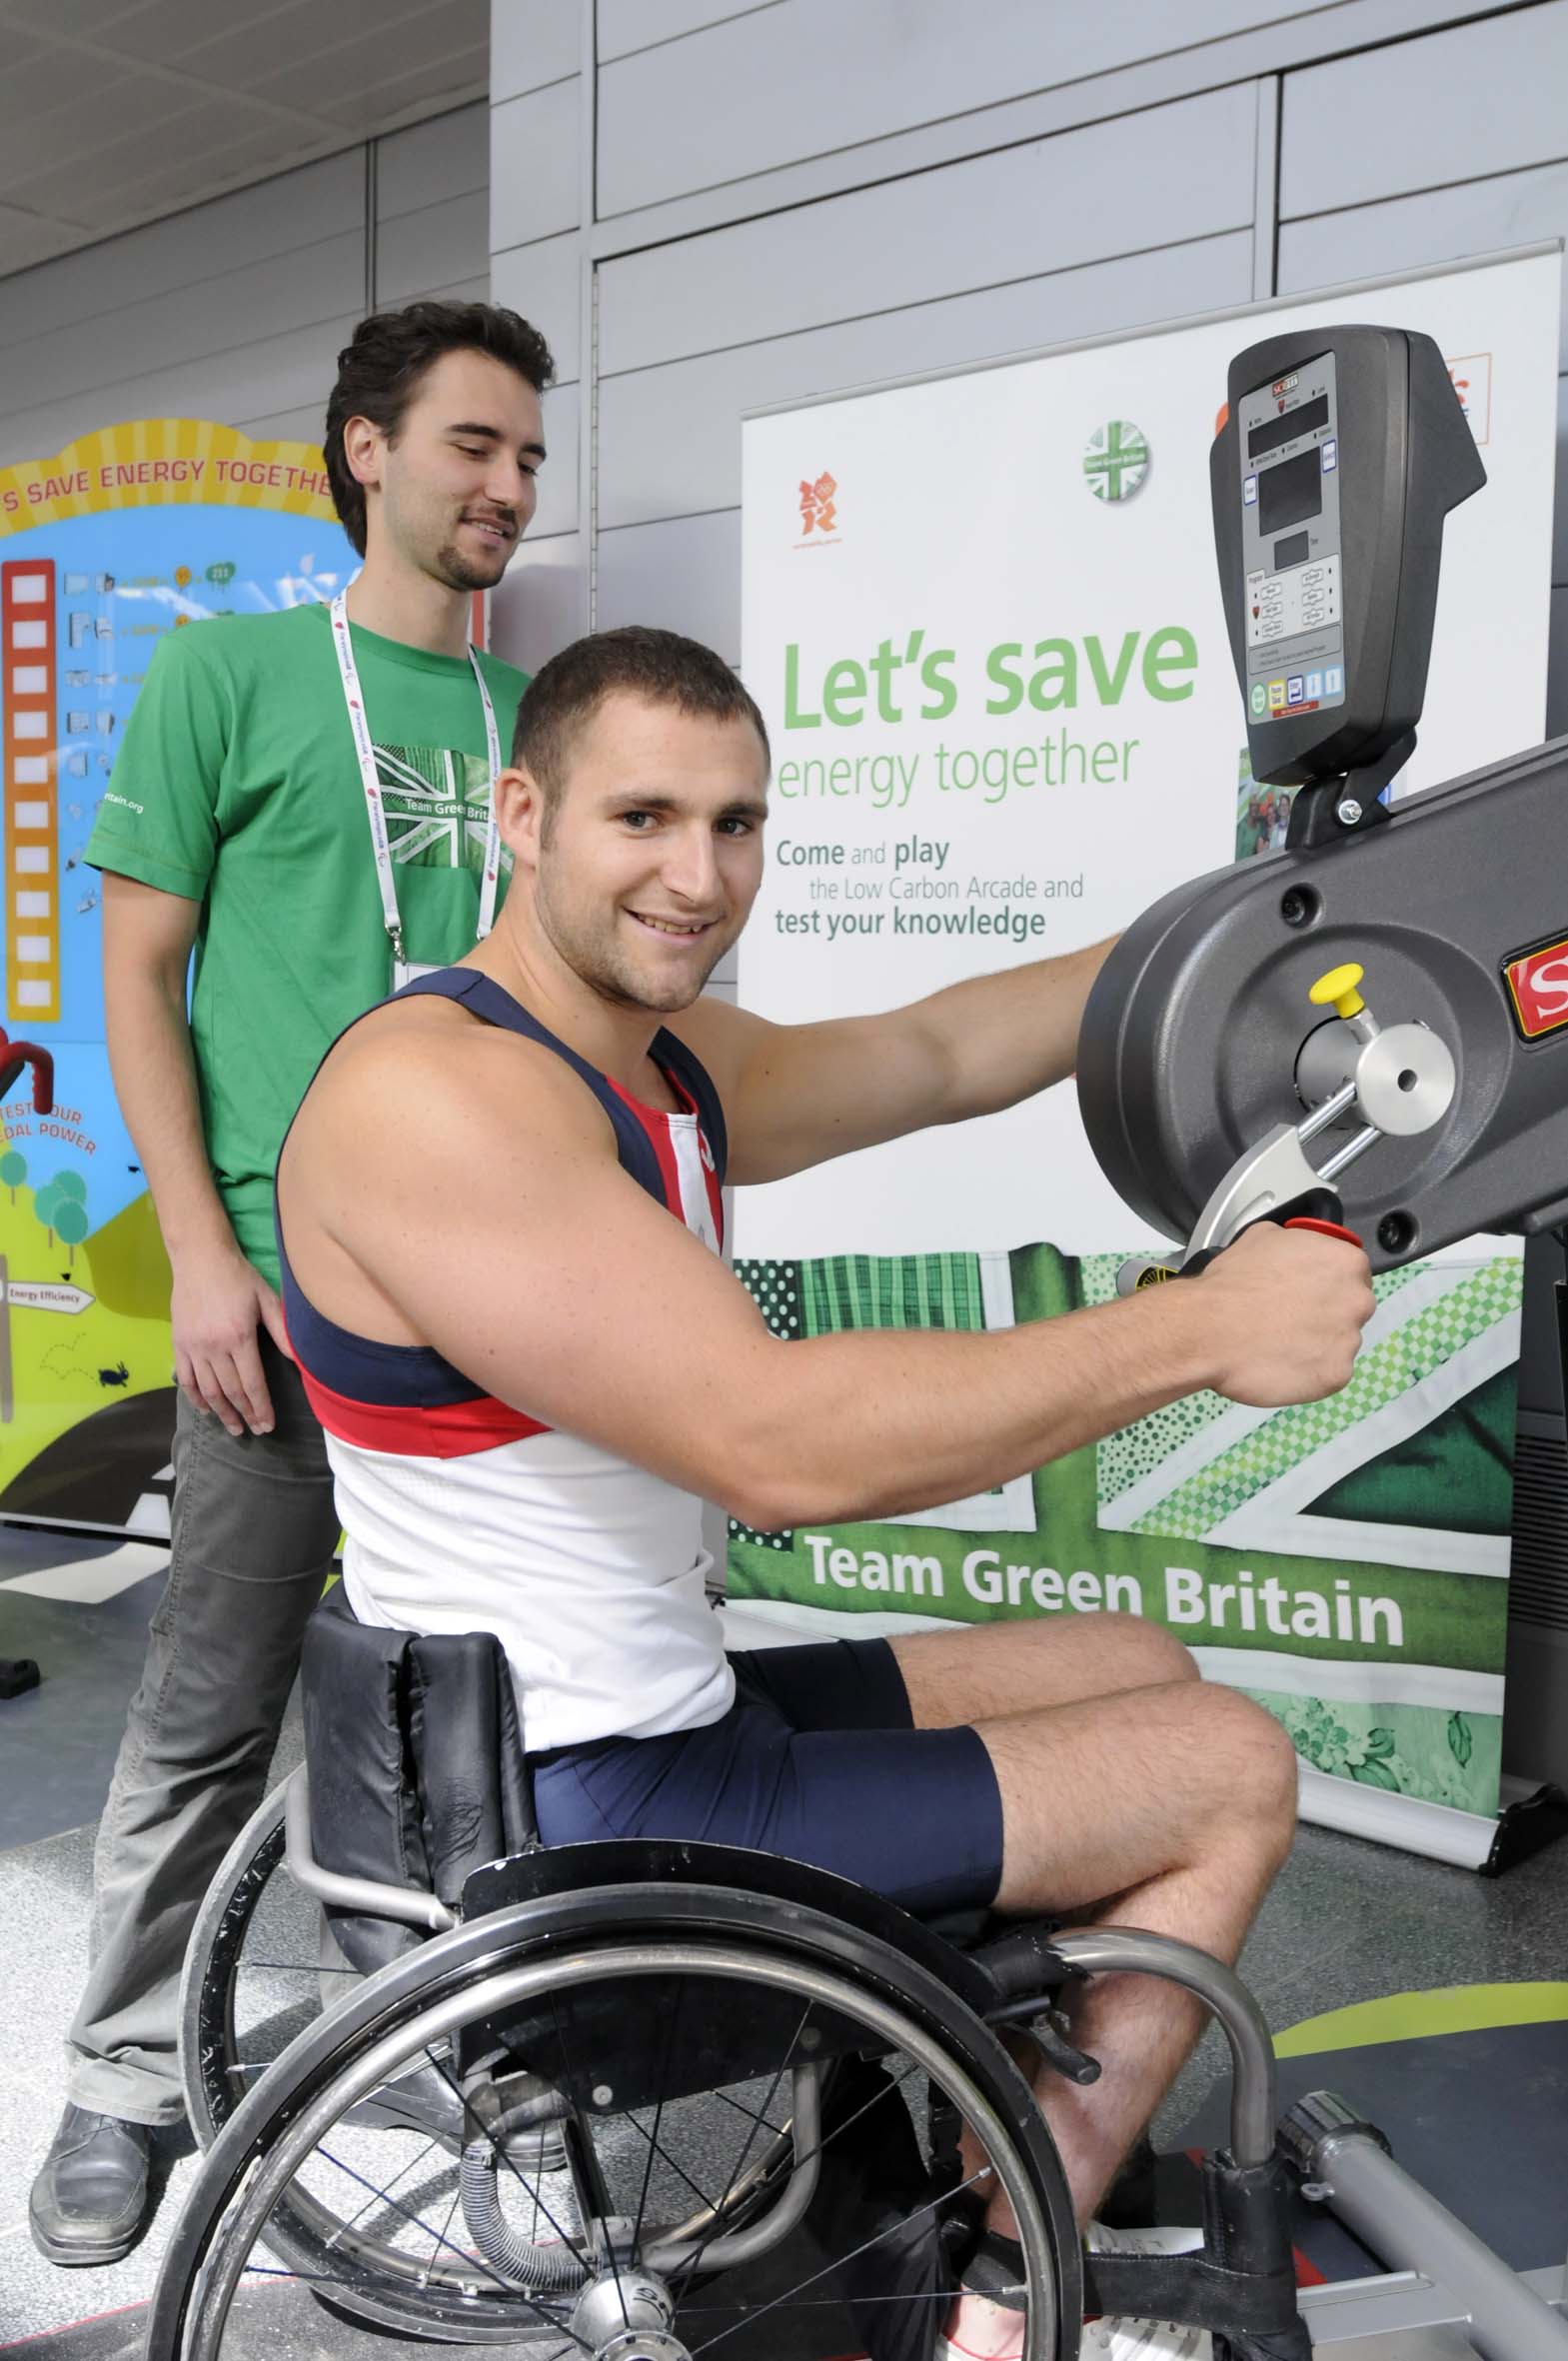 Tom Aggar gold medal winner in mens single scull rowing at the Beijing Paralympics demos the energy producing stationary hand cycle